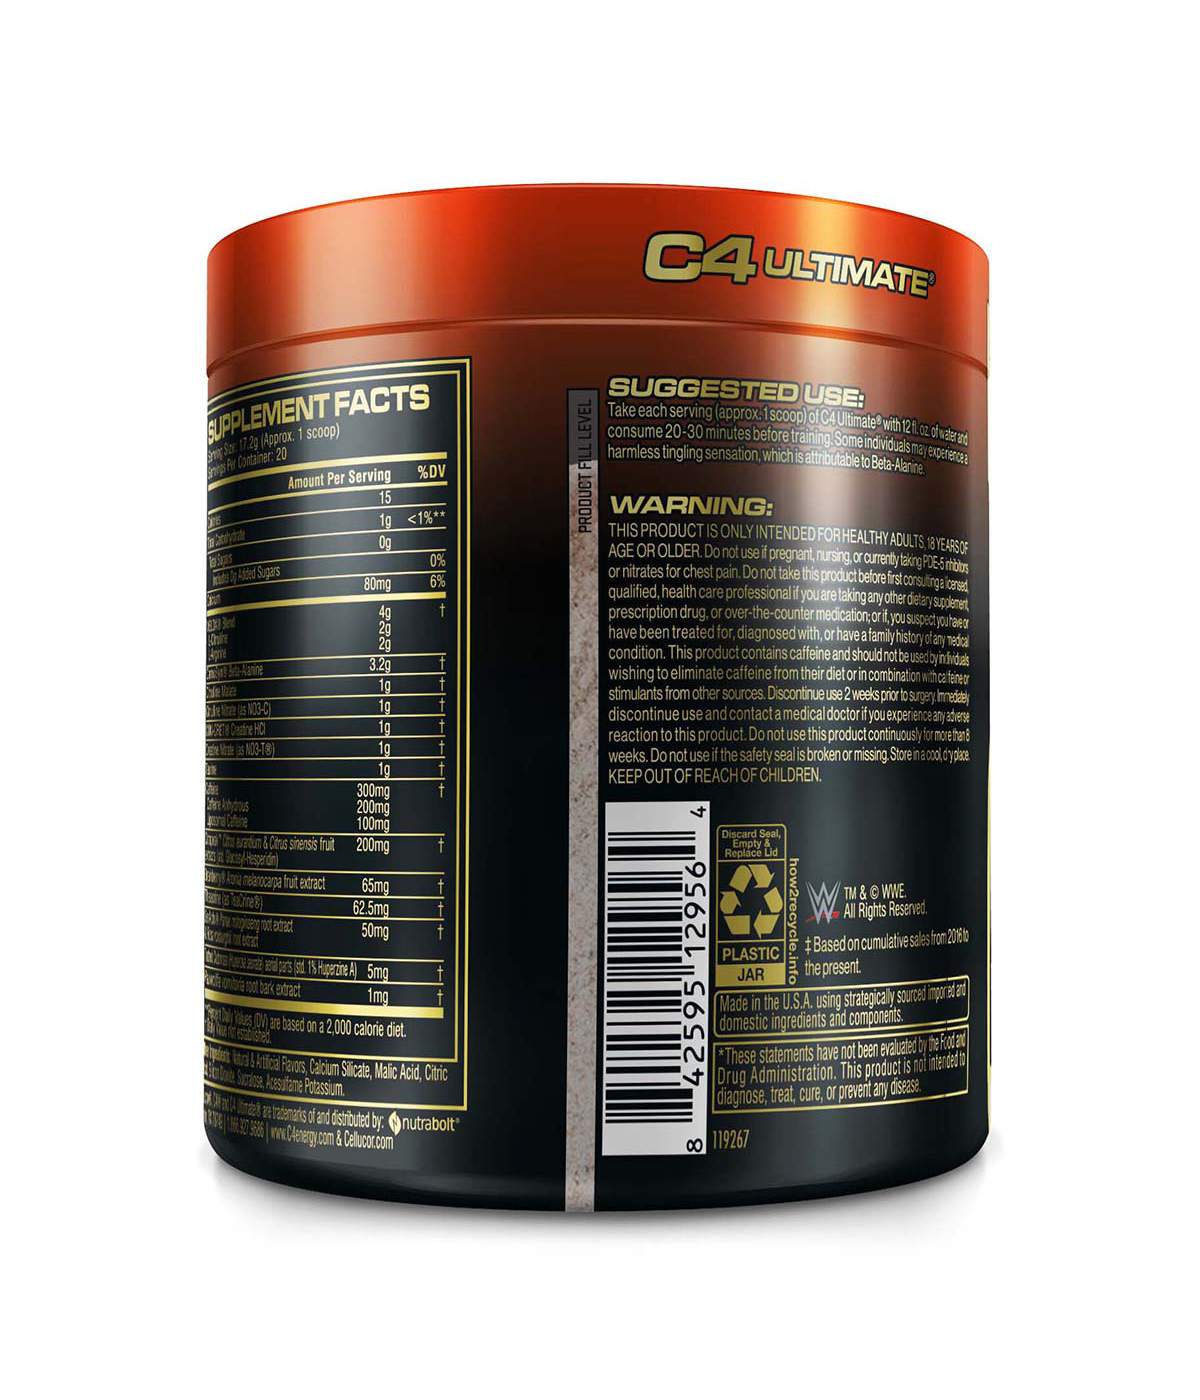 Cellucor C4 Ultimate Pre-Workout - Nectarine Guava Knockout; image 2 of 2